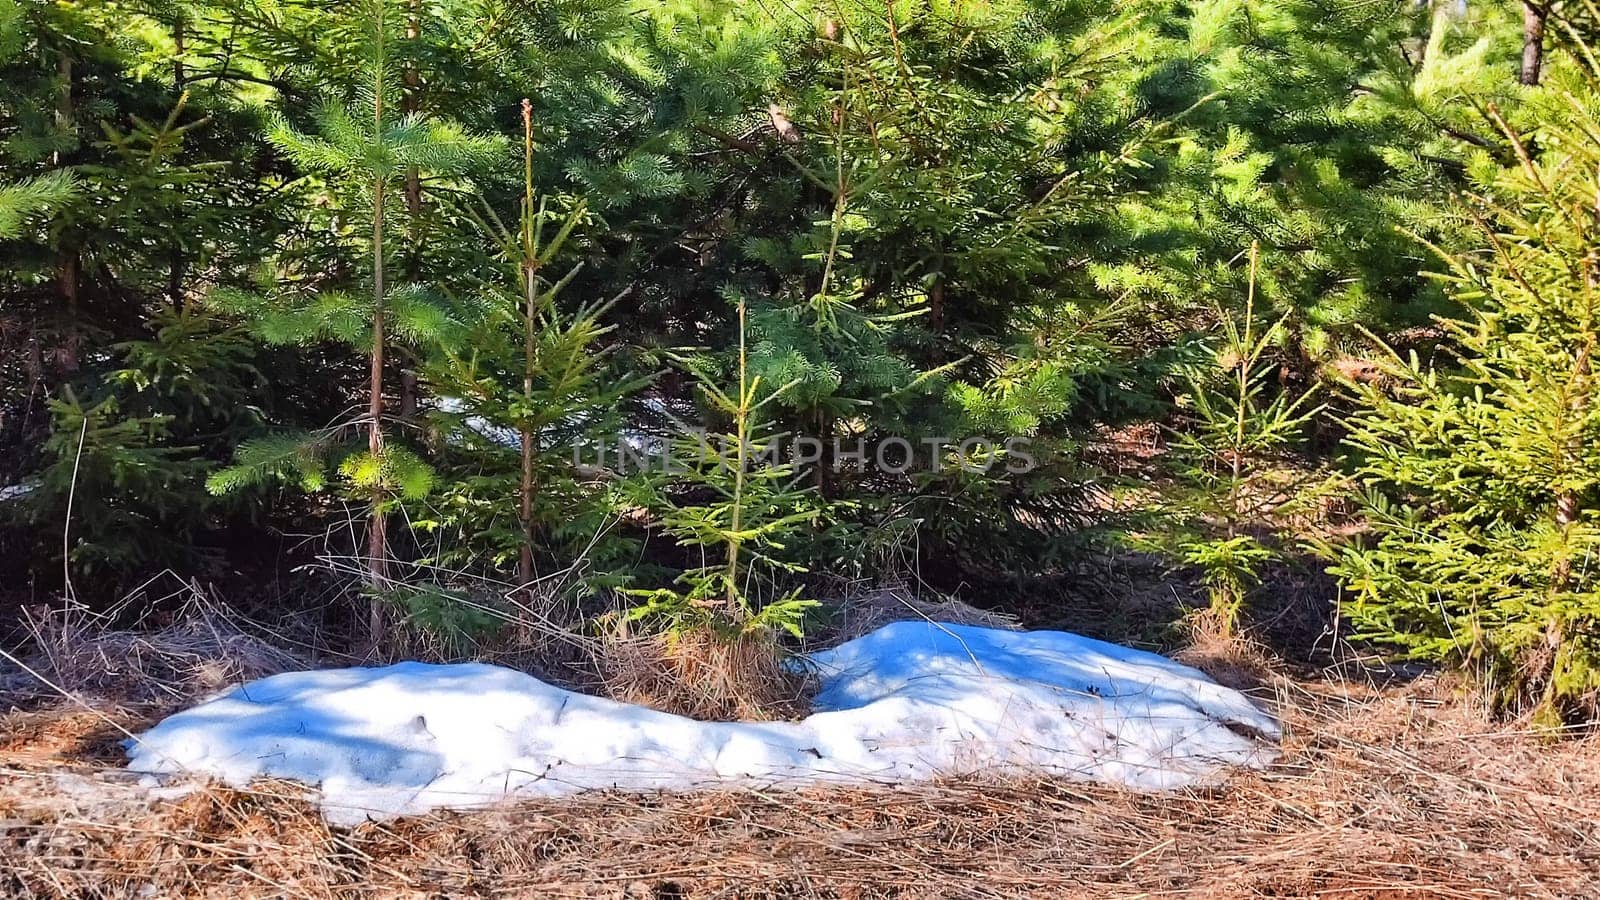 Pine forest in early spring with small snowdrifts. Early Spring Thaw in a Lush Pine Forest With Melting Snowdrifts by keleny